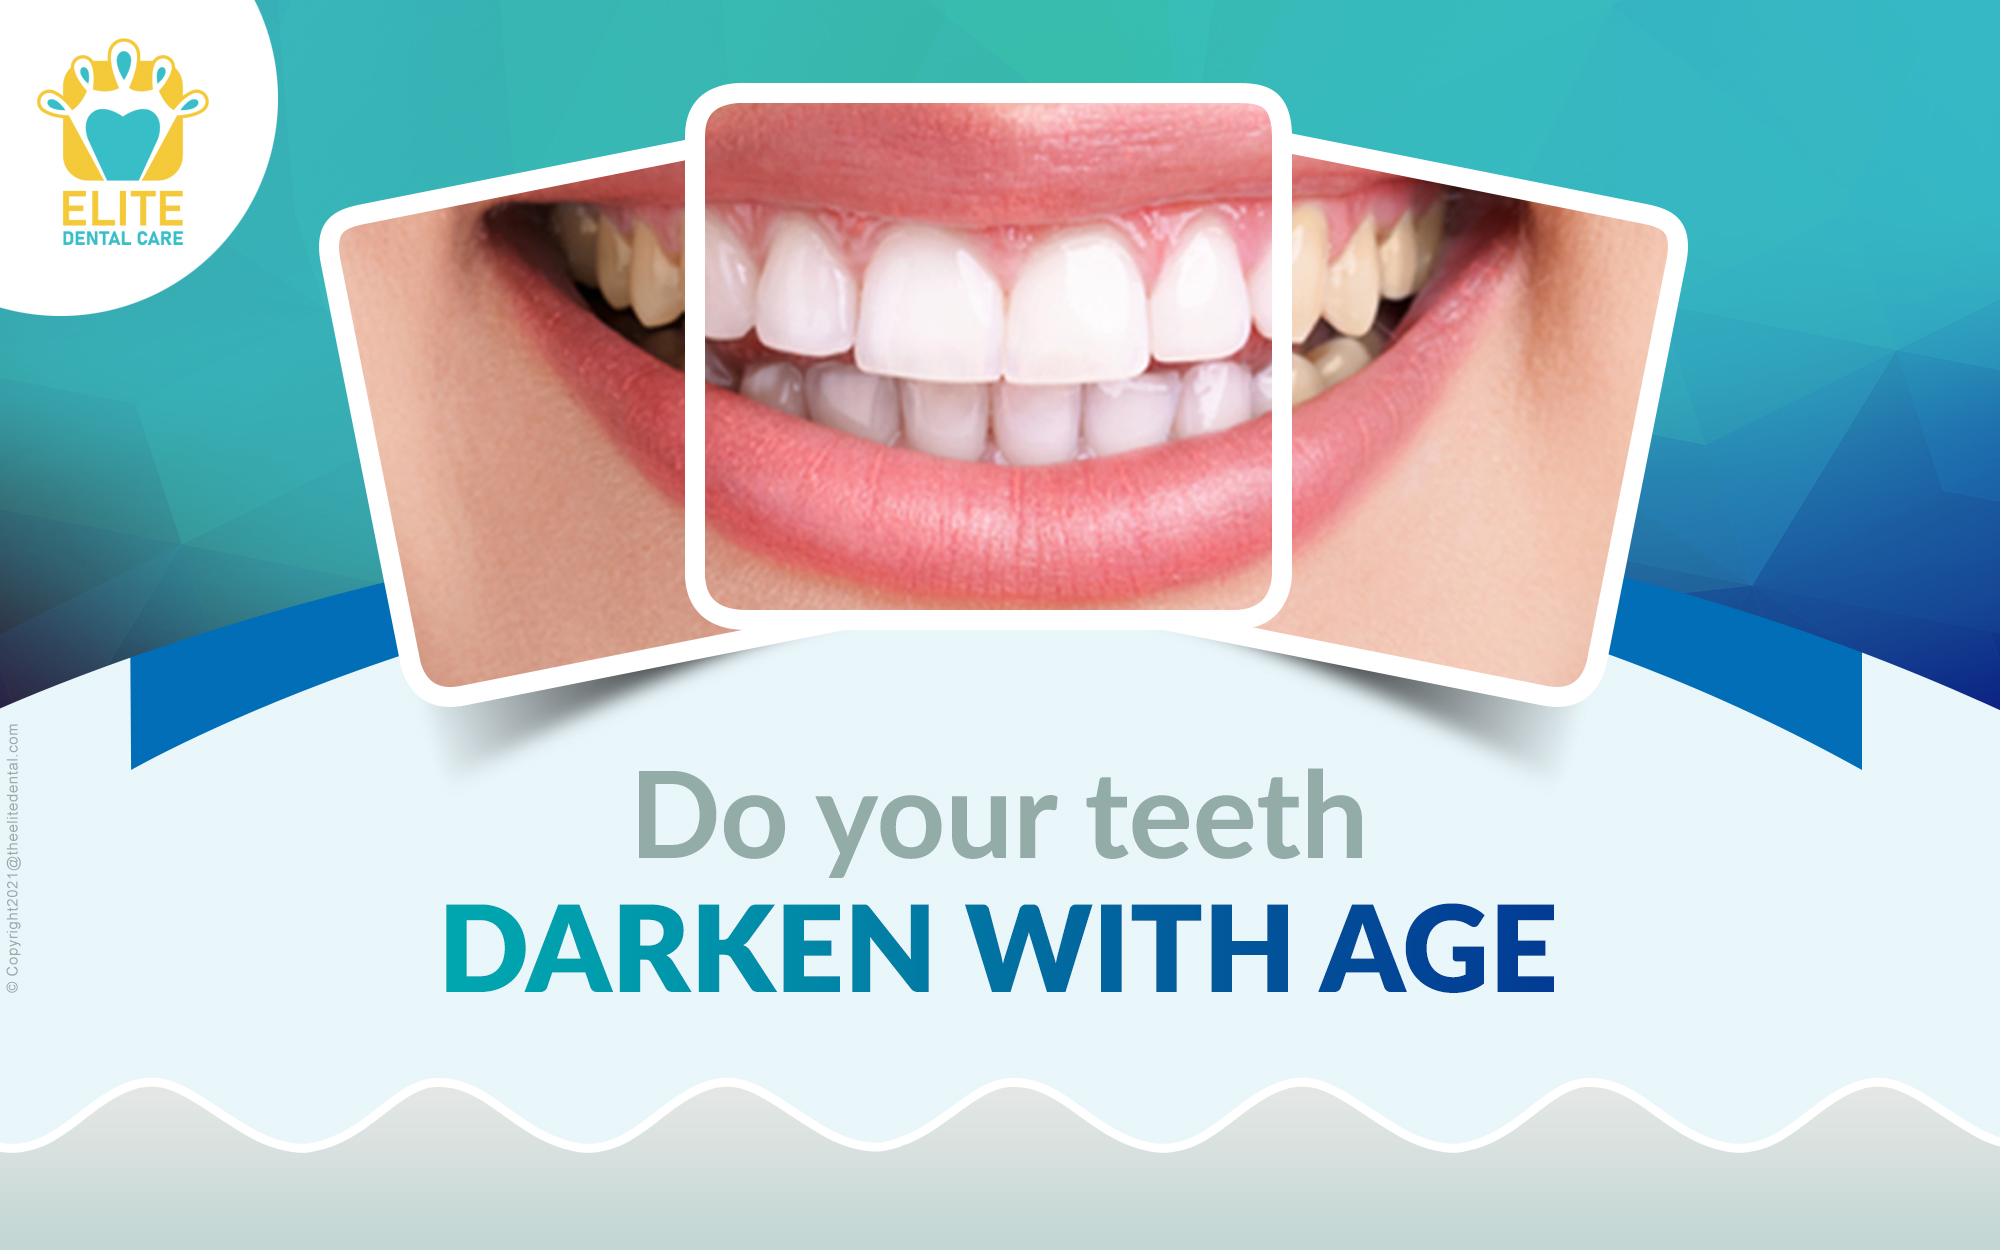 Does Your Teeth Darken with Age?